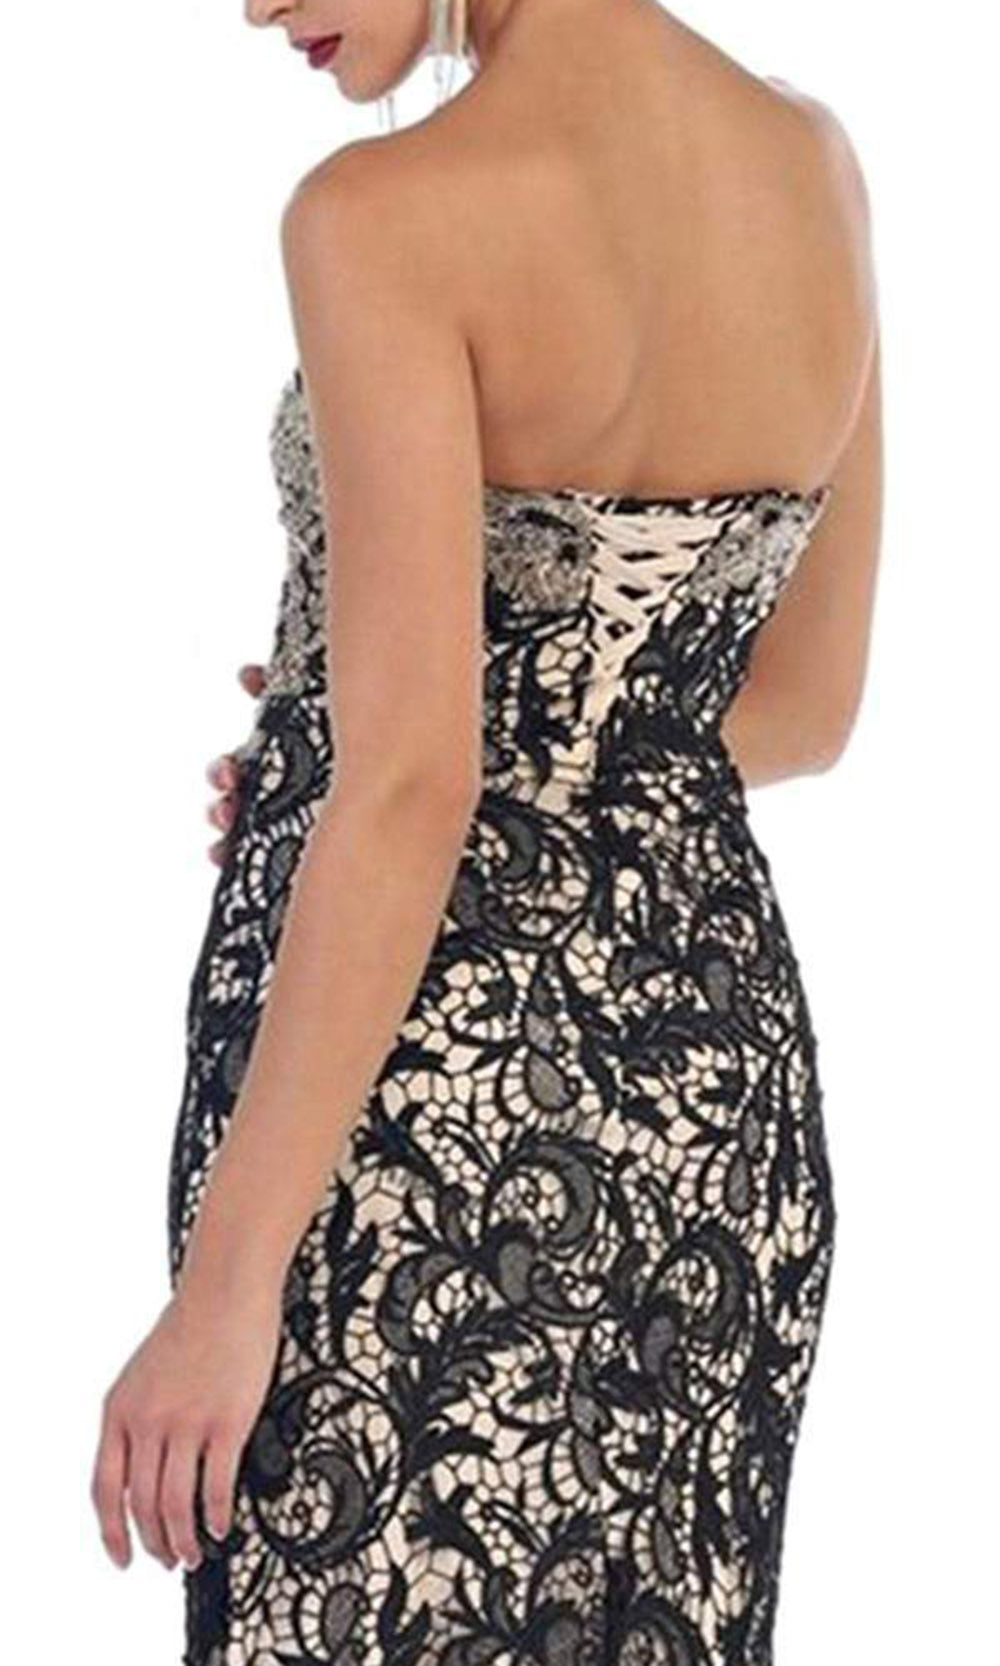 May Queen - Lace Strapless Corset Bodice Mermaid Evening Dress RQ7458 CCSALE 10 / Black/Nude